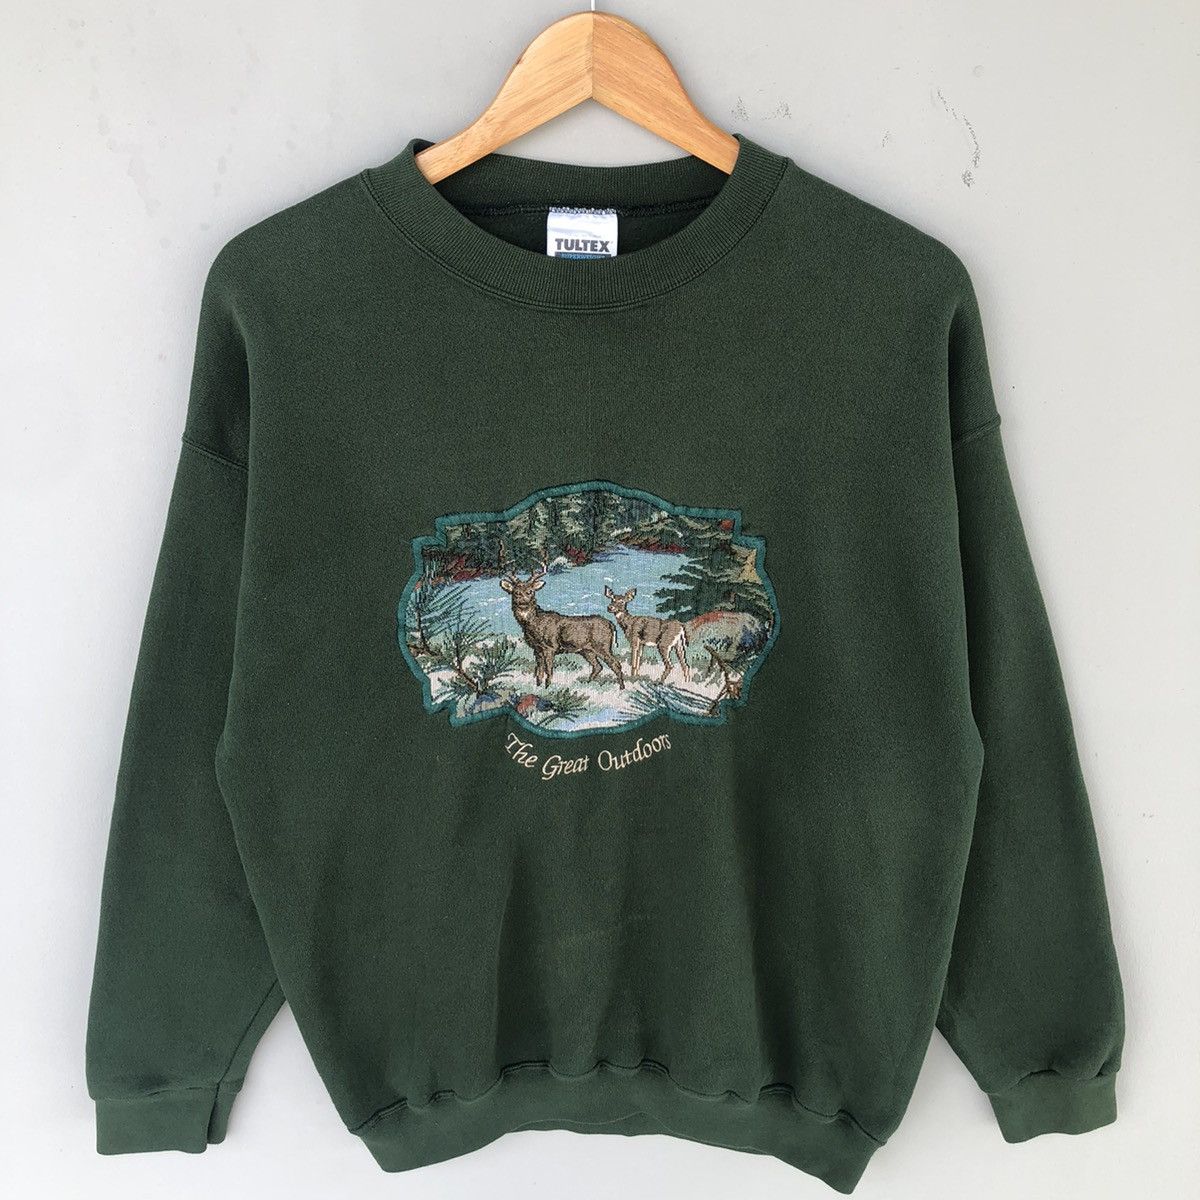 Vintage Vintage Tultex Tag The Great Outdoor Embroided Logo | Grailed